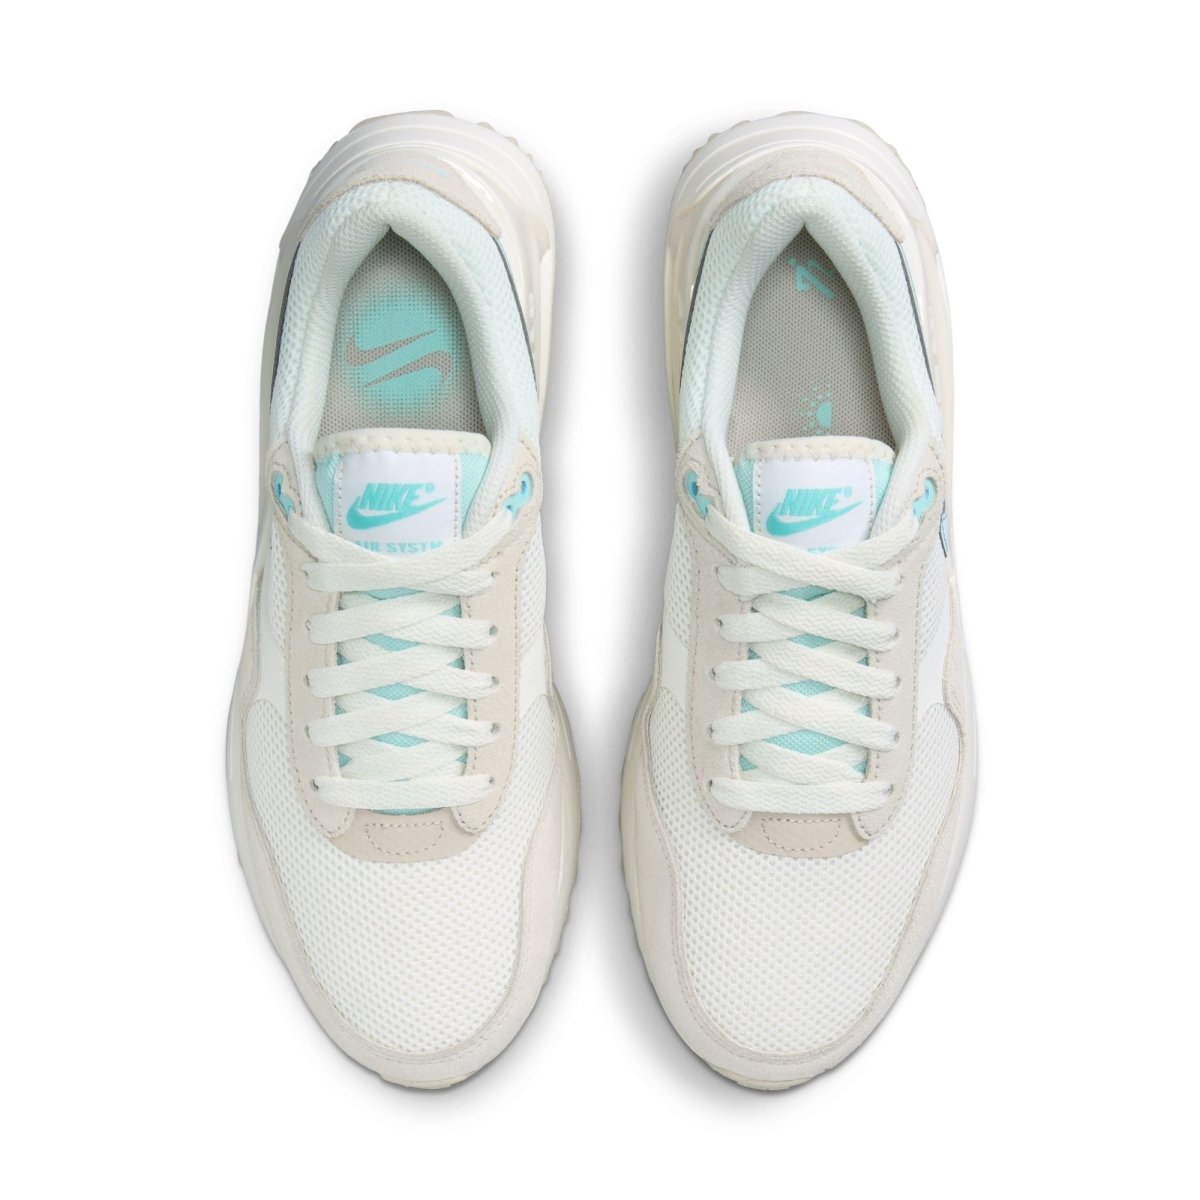 Nike NIKE WOMEN'S AIR MAX SYSTM WHITE/BLUE SHOES - INSPORT